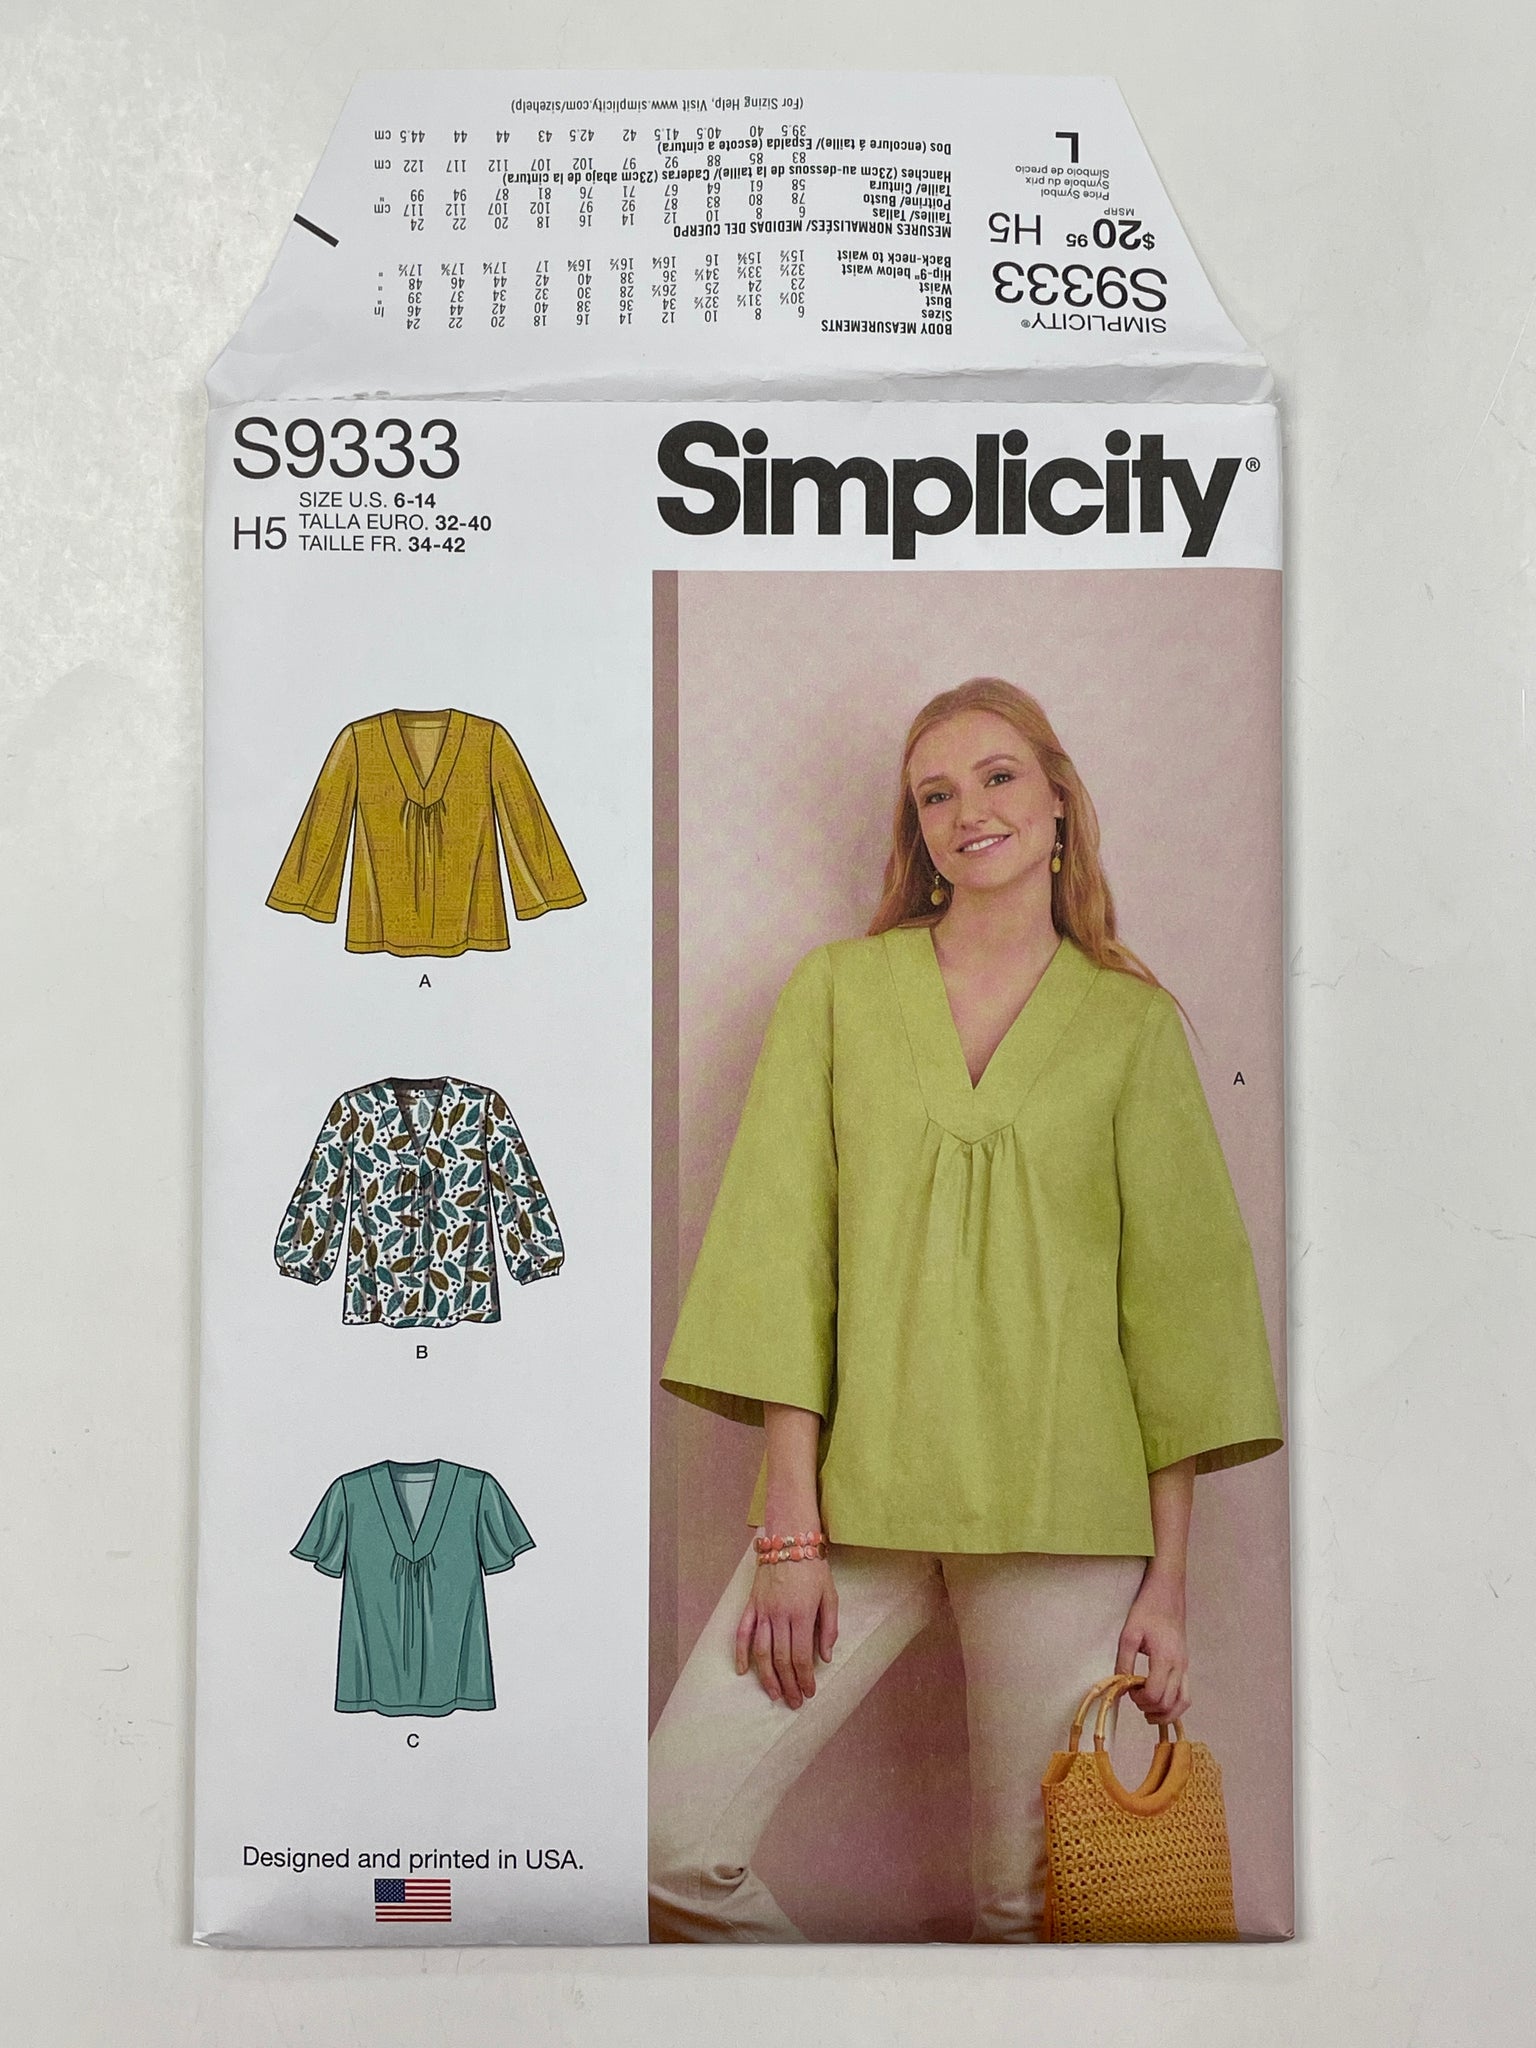 2021 Simplicity 9333 Sewing Pattern - Tops FACTORY FOLDED